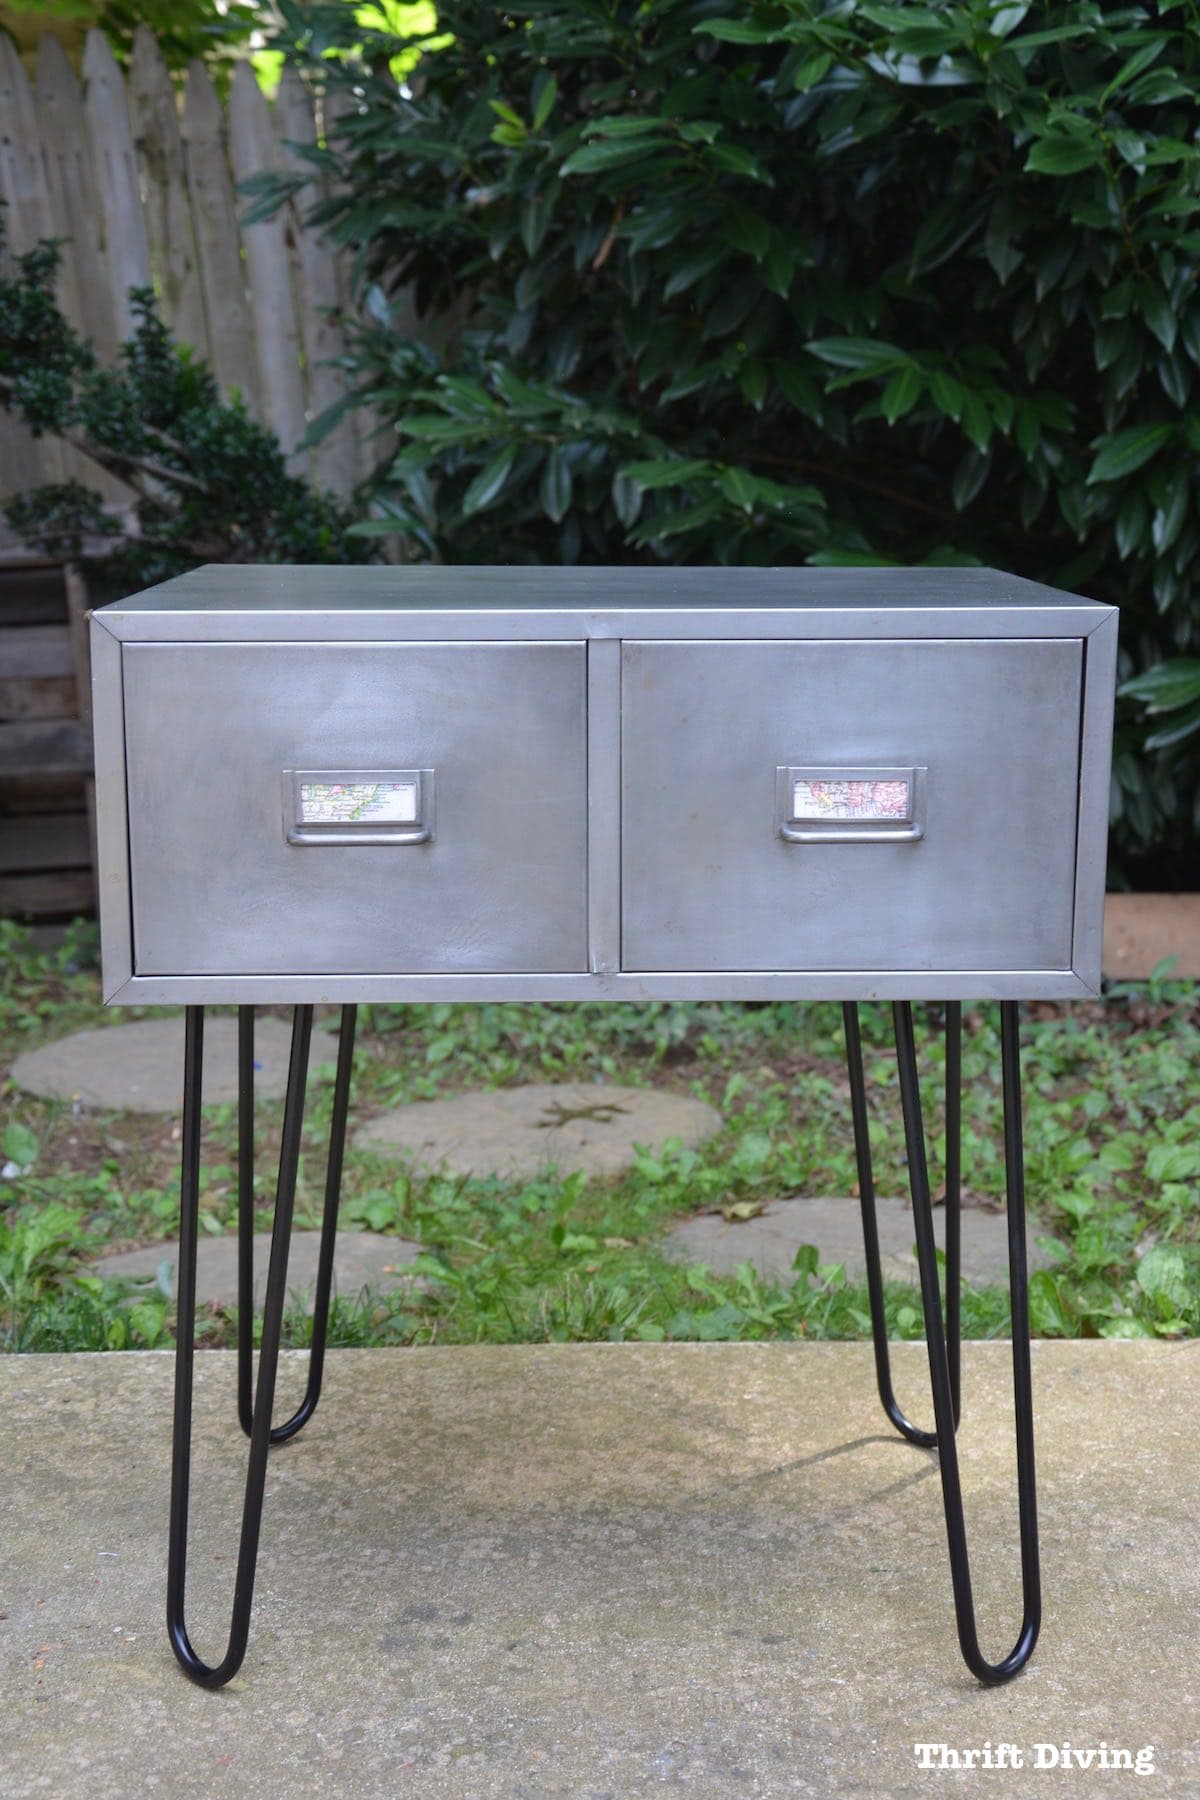 Hairpin legs on a $7.00 vintage metal cabinet from the thrift store. Over 500 DIY posts and projects on Thrift Diving!